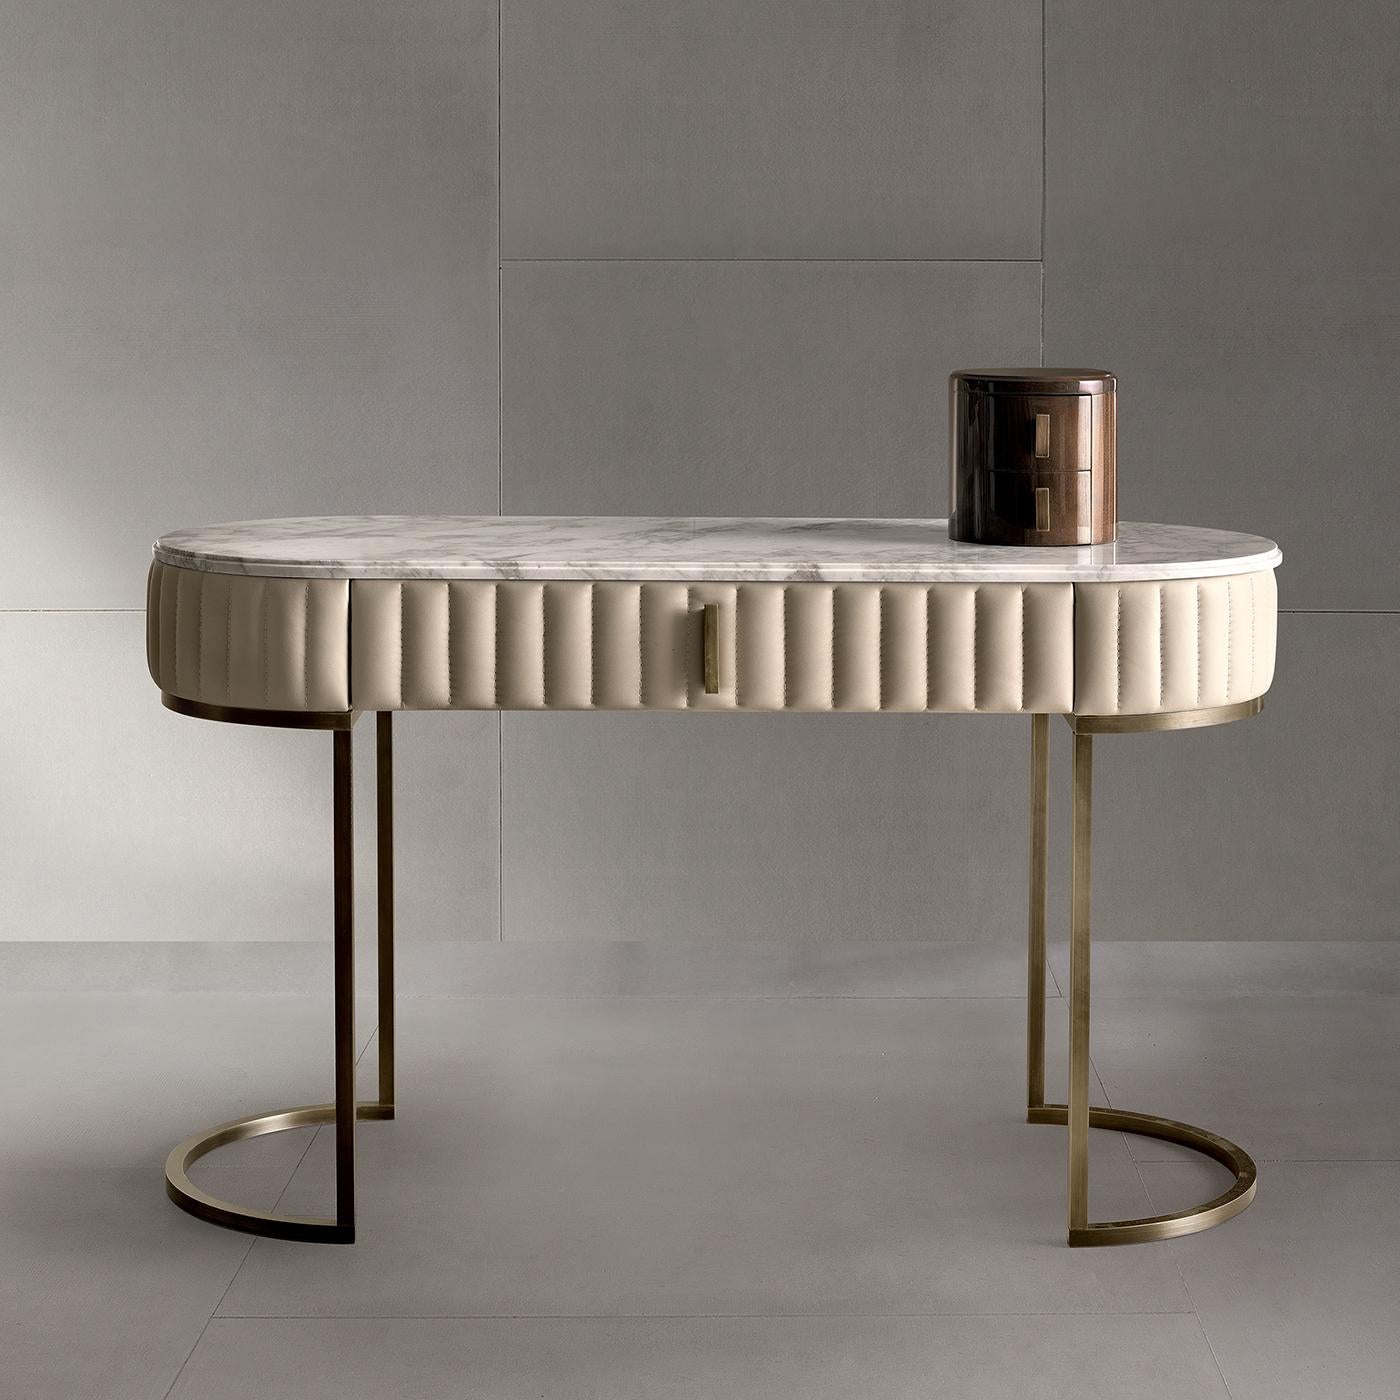 The contemporary style of this original vanity table provides a stylish surface for perfume, makeup, and jewelry. Two burnished brass tubular legs support an elongated oval Emperador marble top with a large rim upholstered in grosgrain design gray